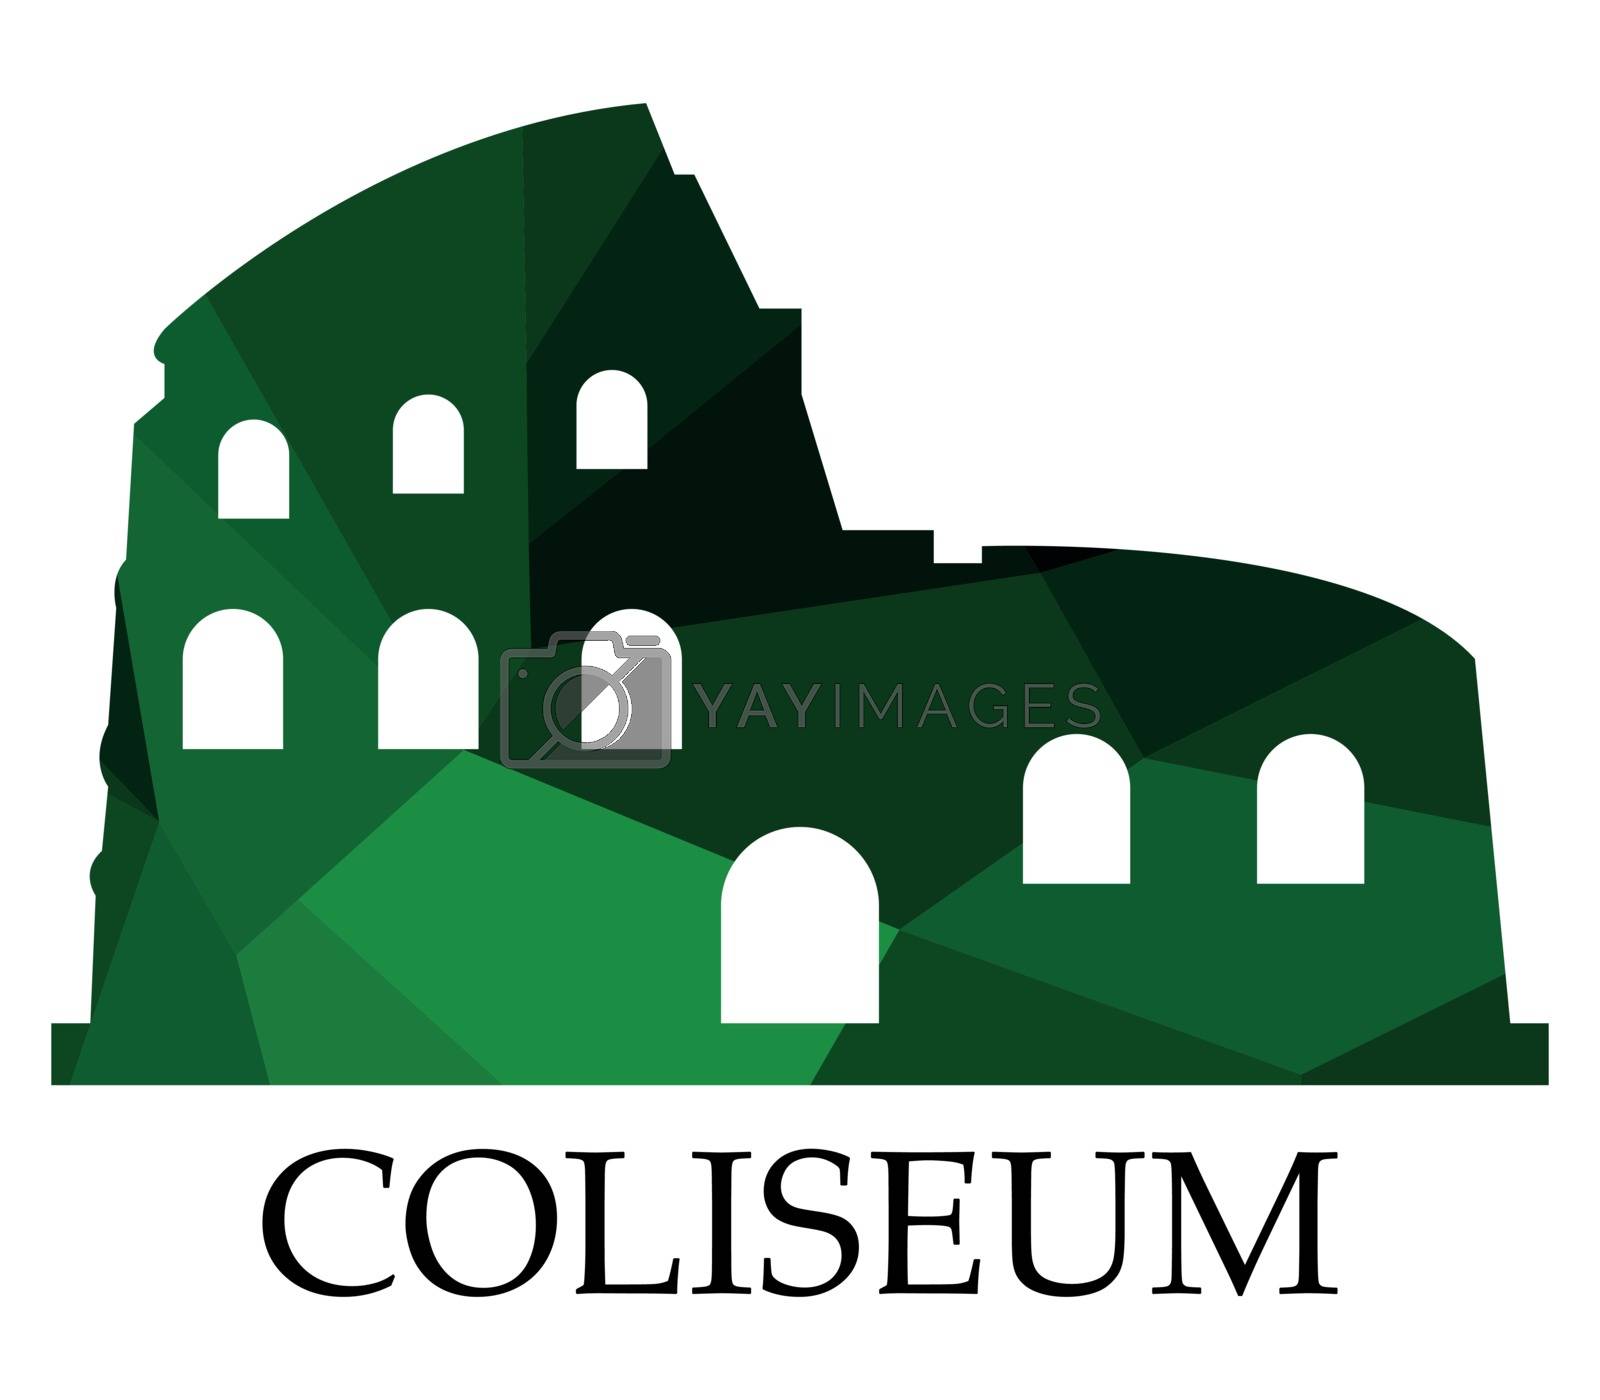 Royalty free image of colosseum icon by Mark1987